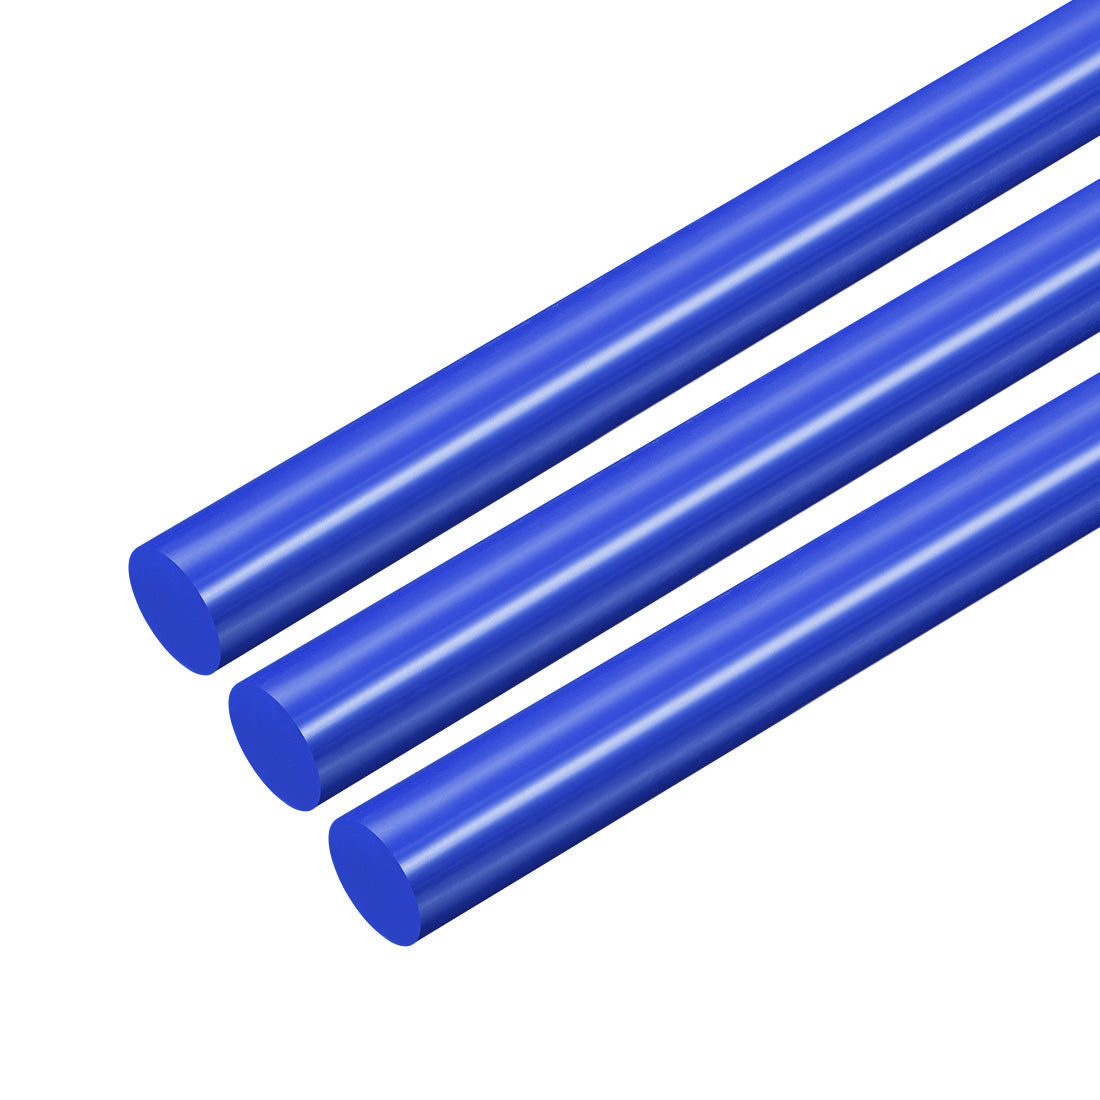 uxcell Uxcell Plastic Round Rod,10mm Dia 50cm Blue Engineering Plastic Round Bar 3pcs